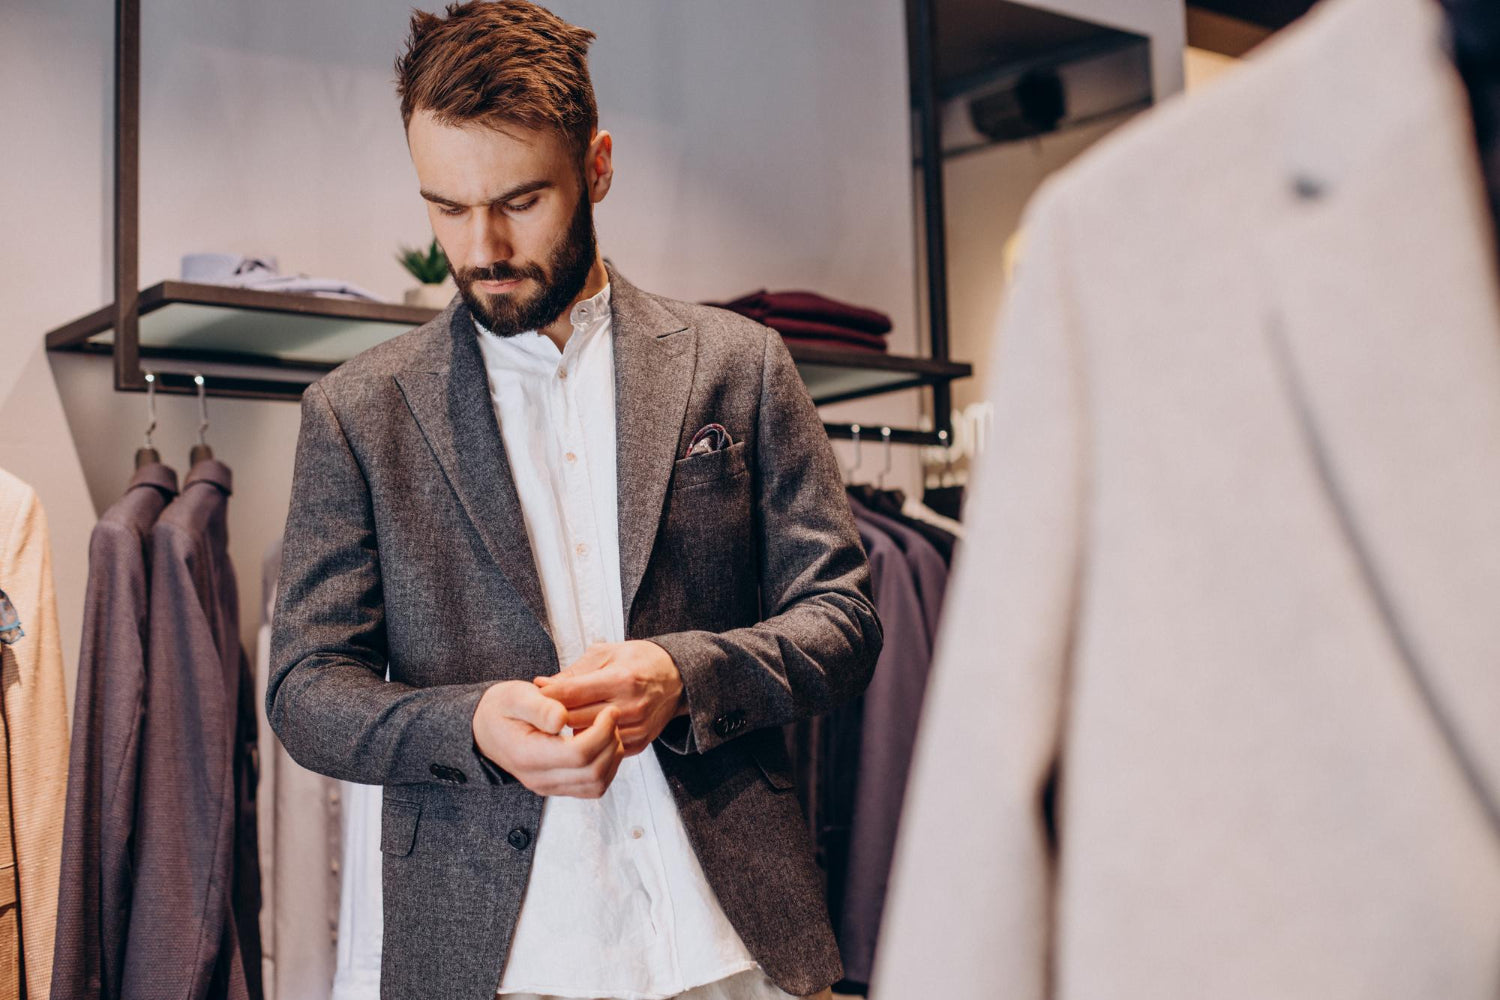 Men's Clothing Buying Guide: The Ultimate Checklist for Style, Fit, and Quality